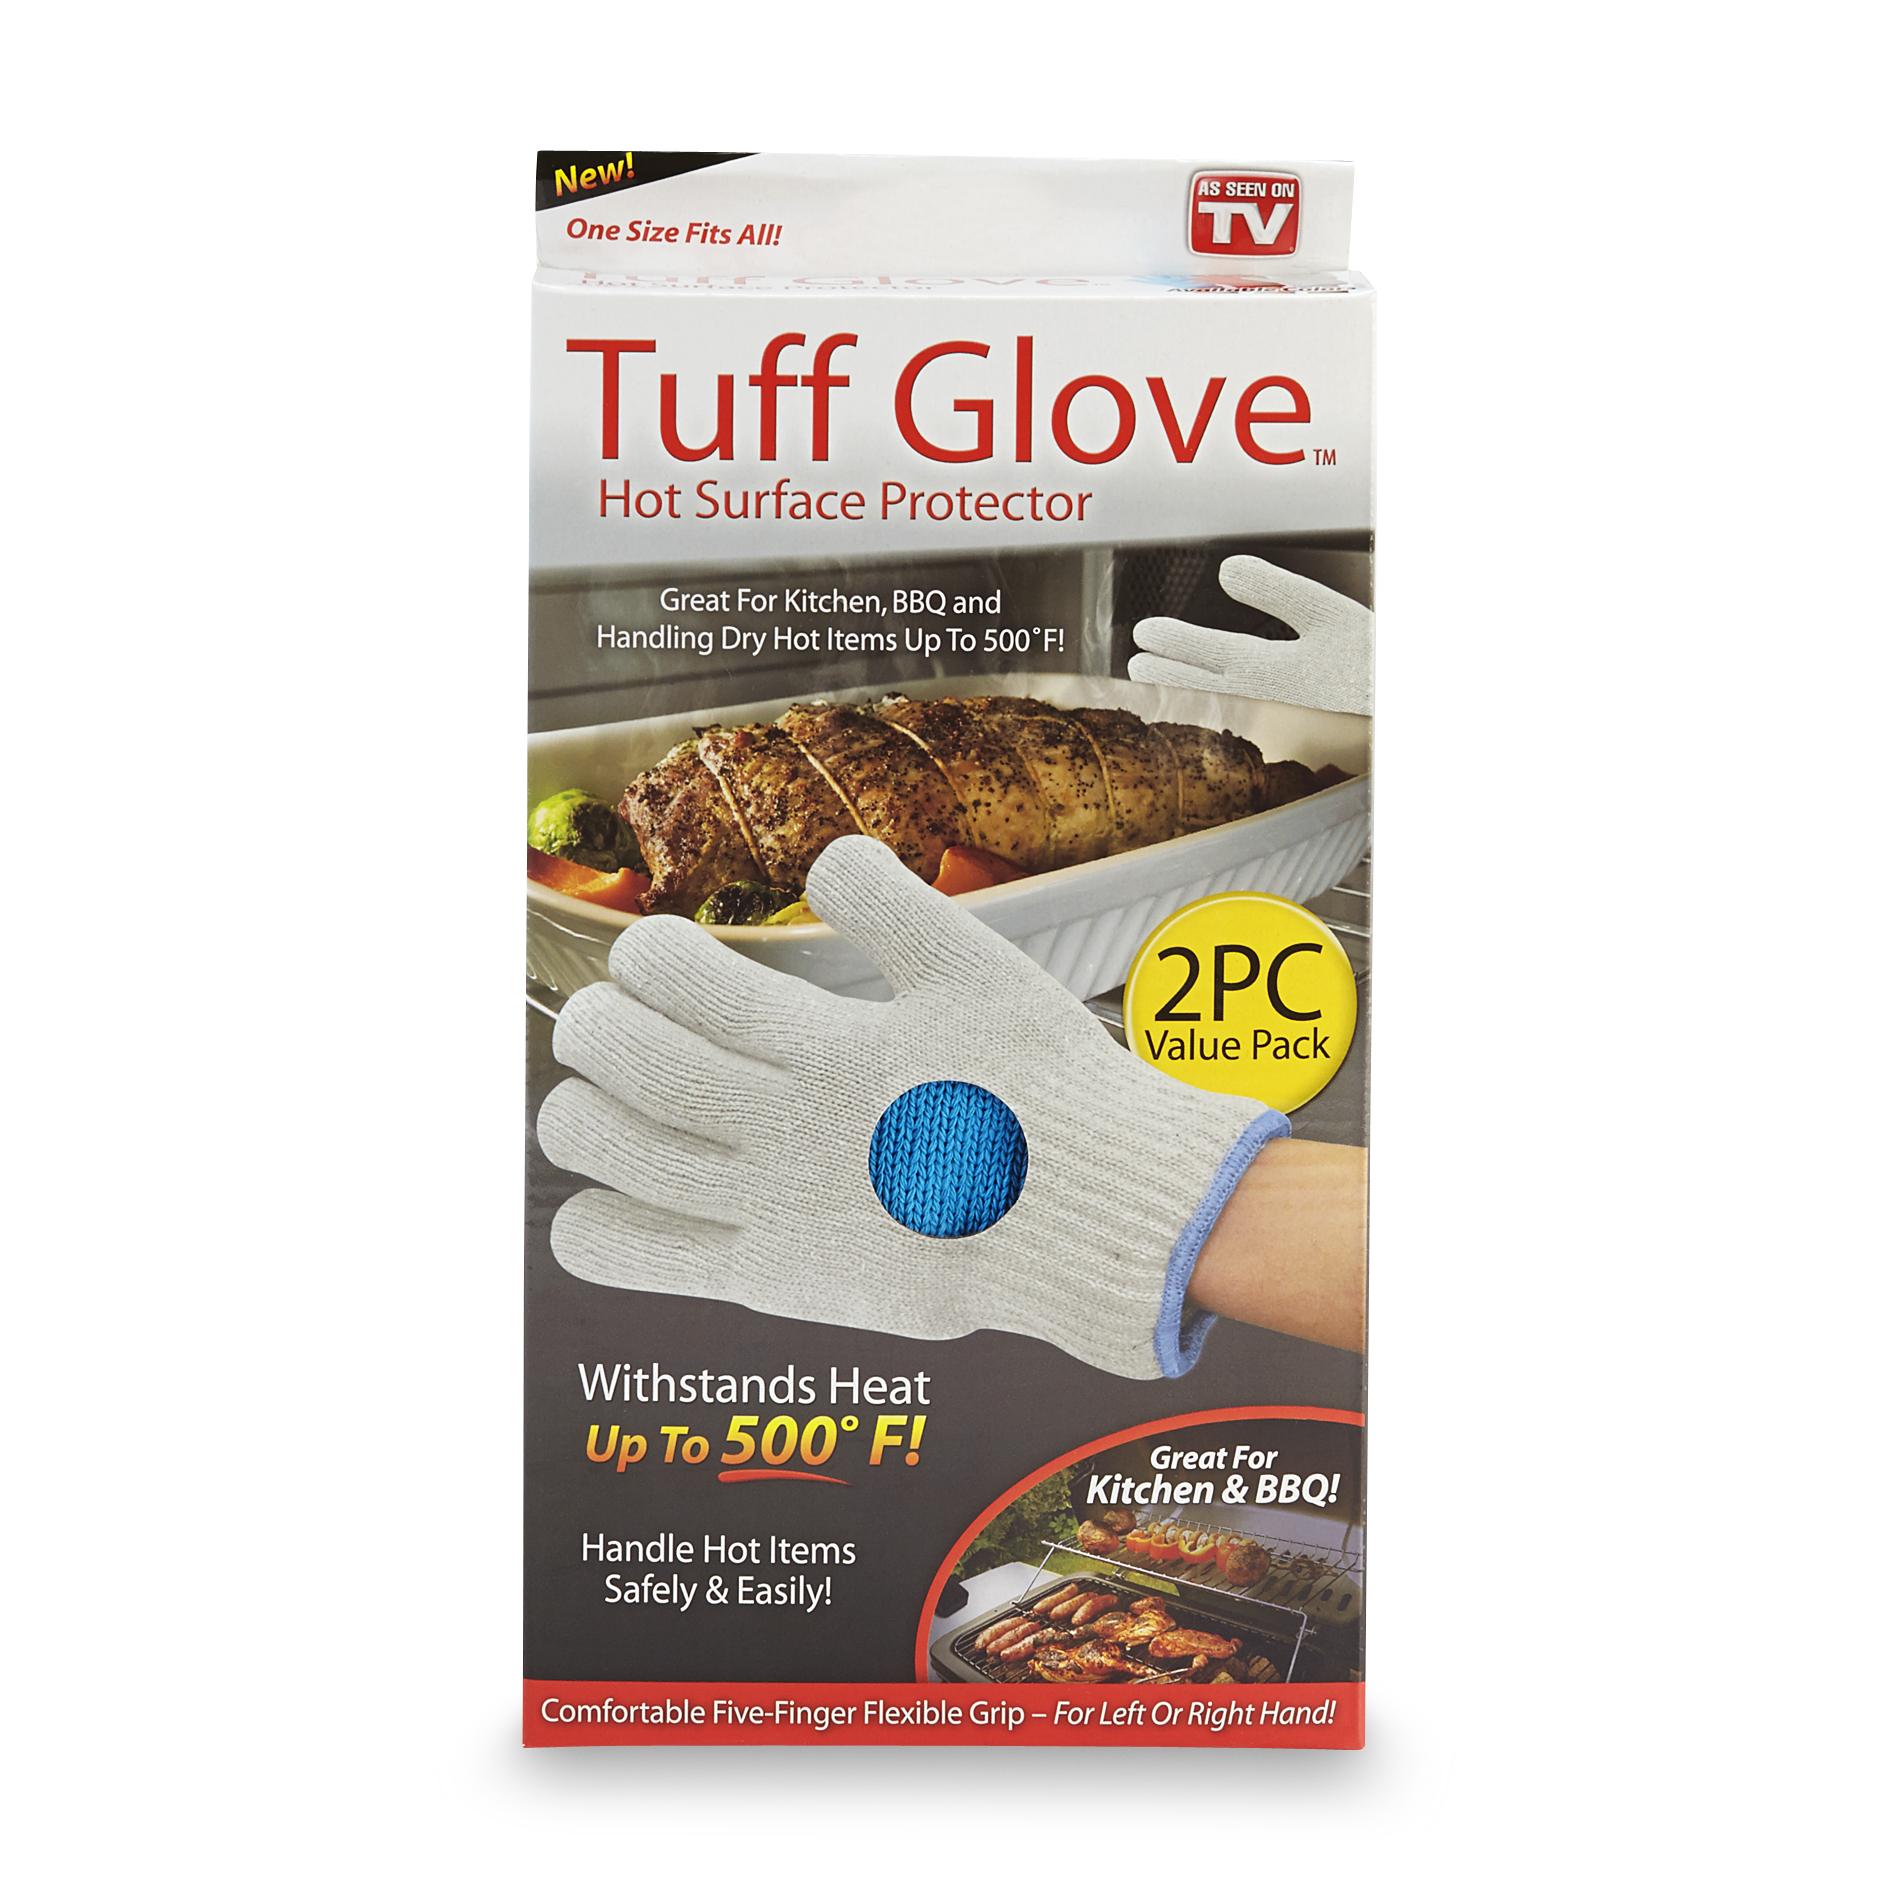 UPC 735541511165 product image for As Seen On TV Tuff Glove Hot Surface Protectors - ONTEL PRODUCTS CORPORATION | upcitemdb.com